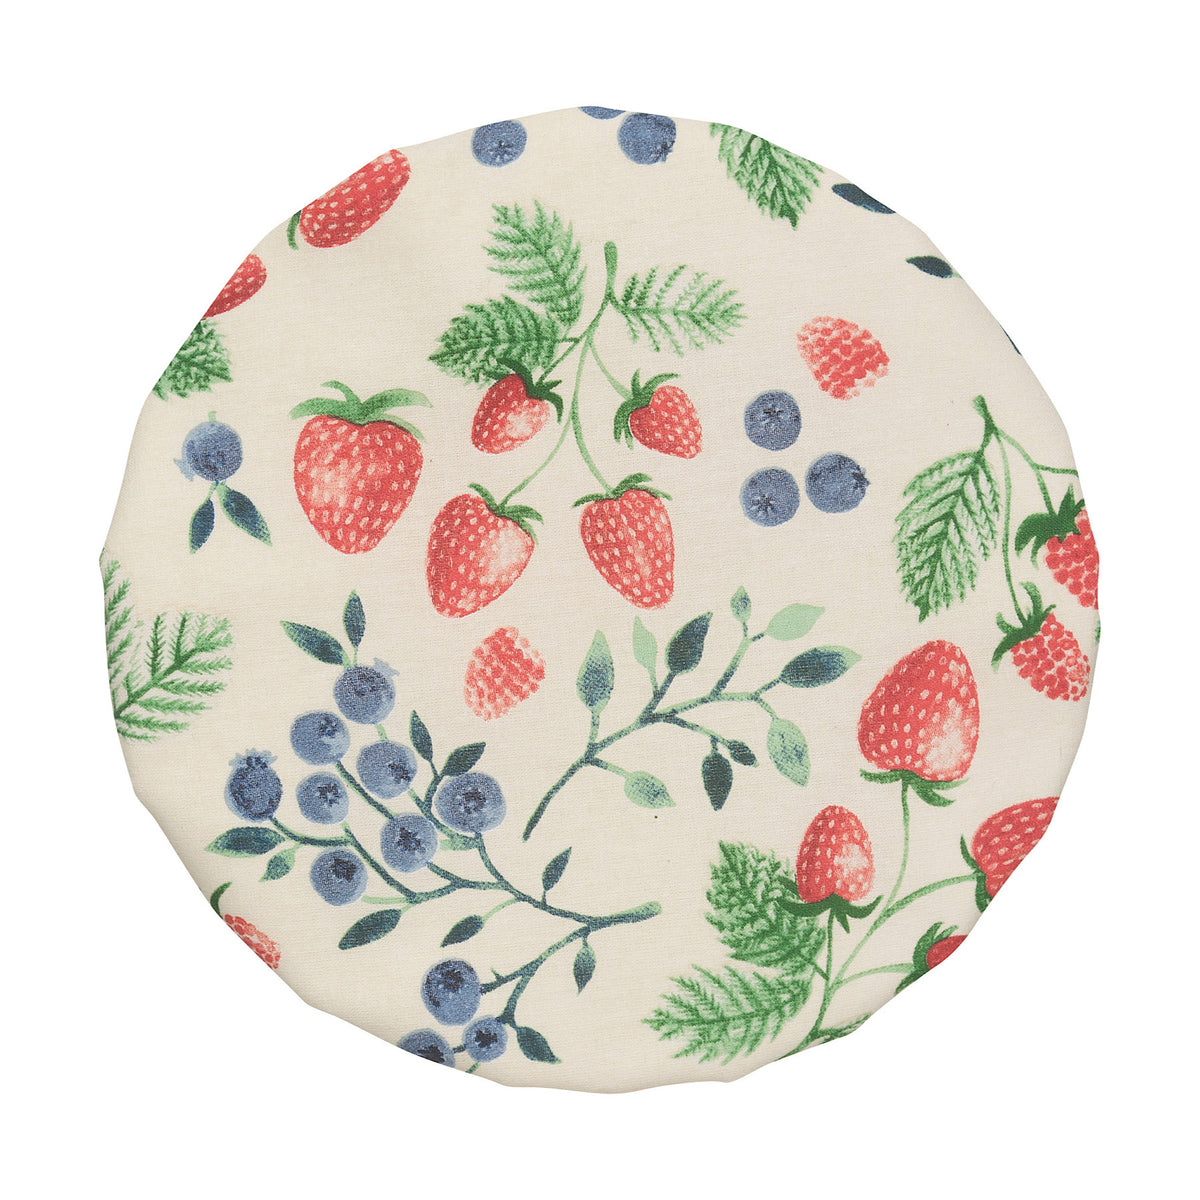 Berry Patch Bowl Covers, Set of 2